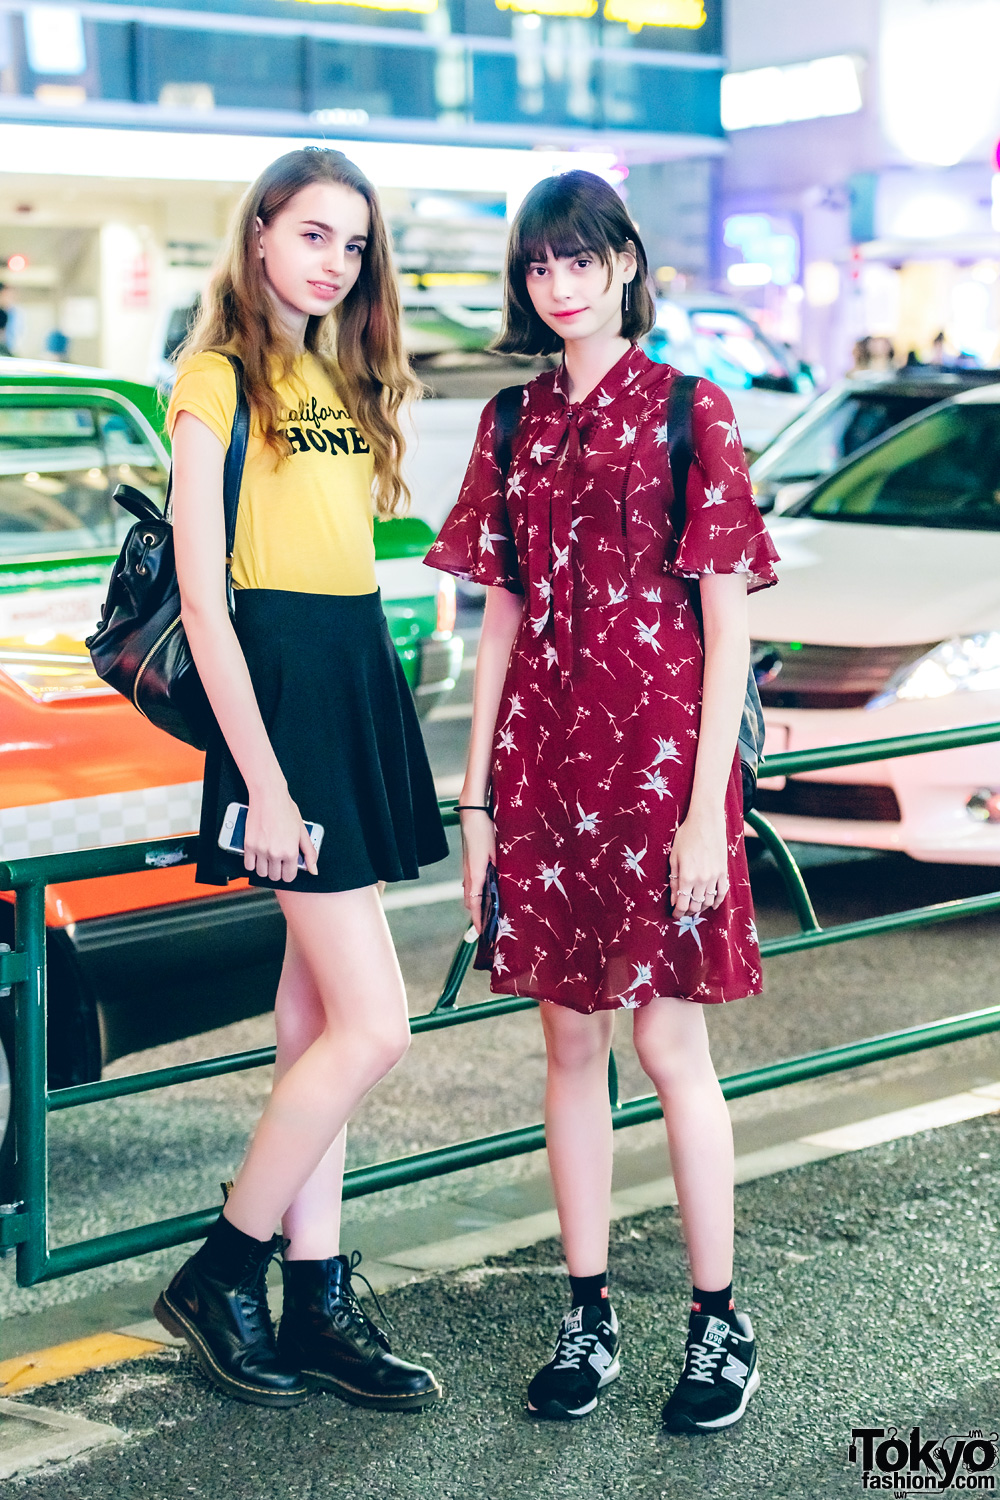 Harajuku Models in Casual Street Styles w/ Dr. Martens Boots, New